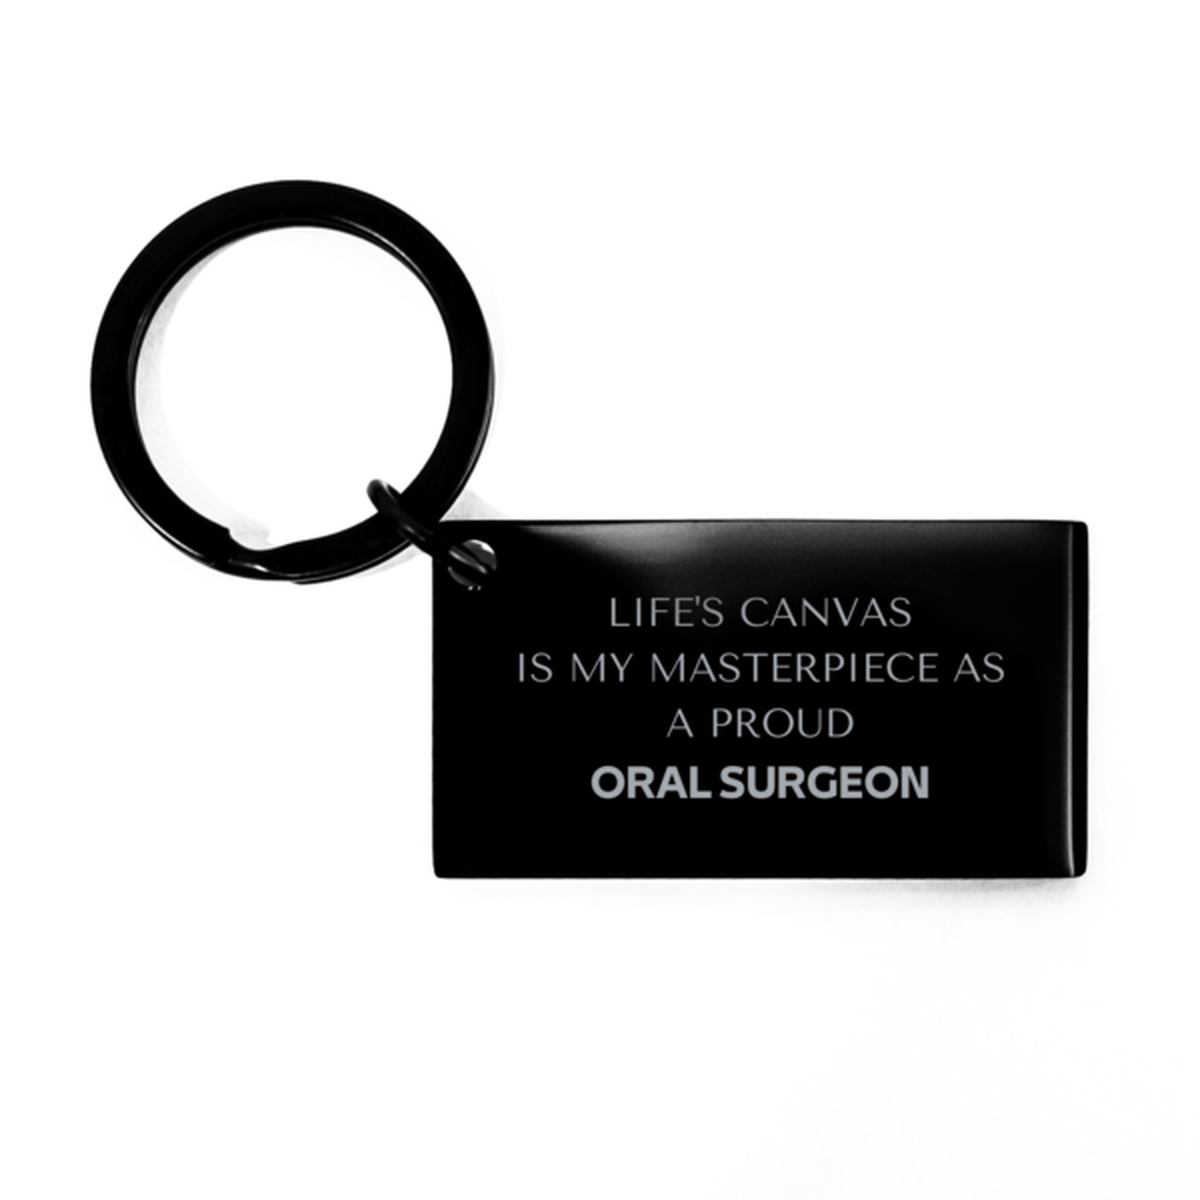 Proud Oral Surgeon Gifts, Life's canvas is my masterpiece, Epic Birthday Christmas Unique Keychain For Oral Surgeon, Coworkers, Men, Women, Friends